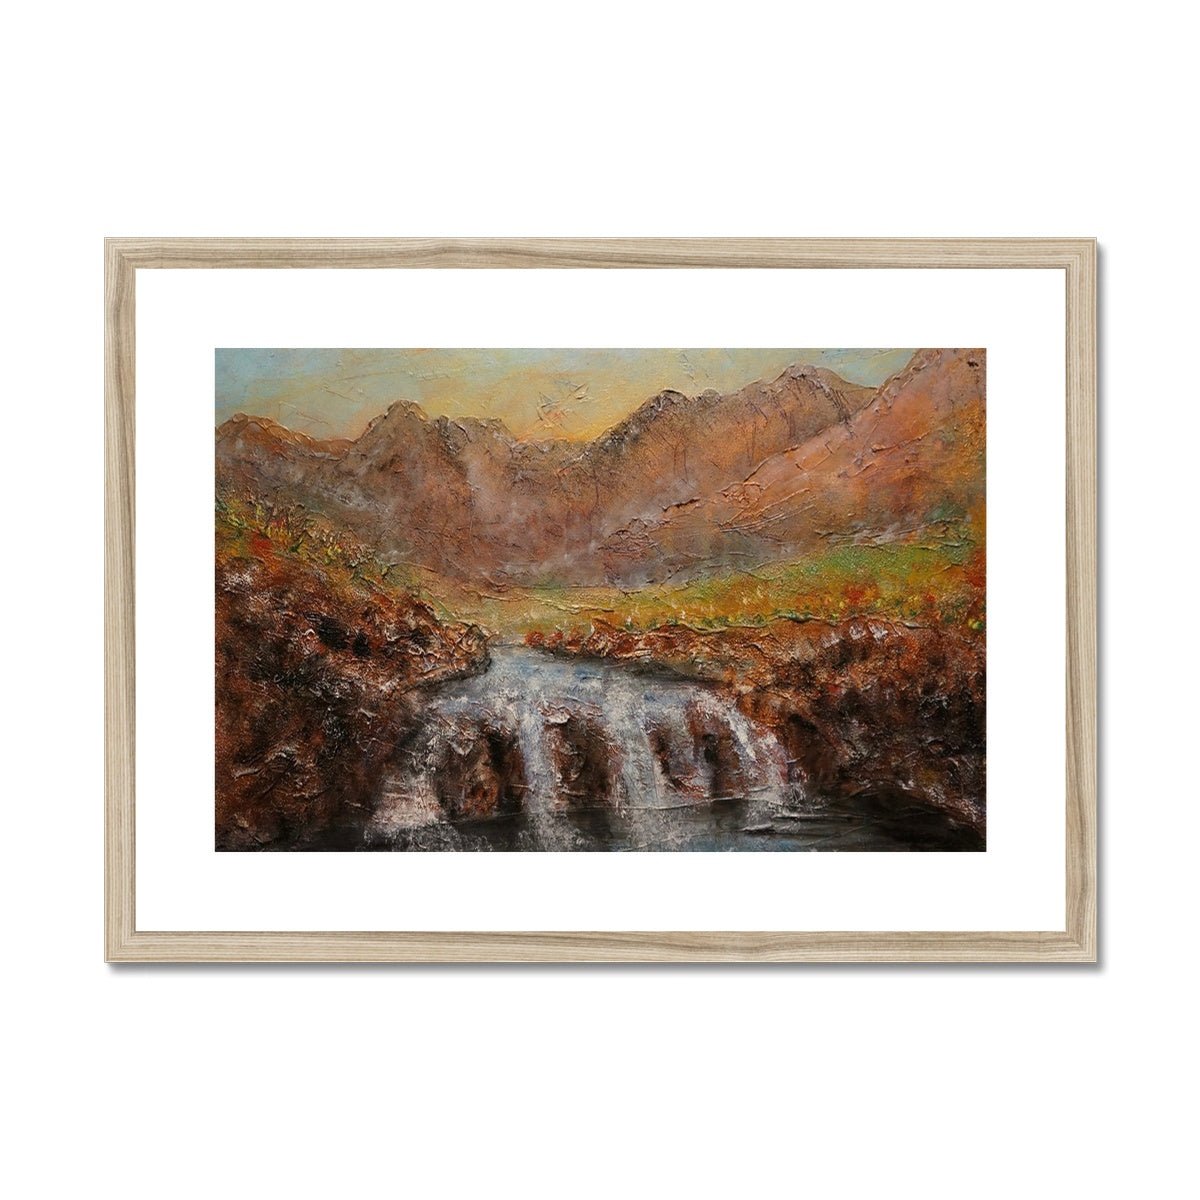 Fairy Pools Dawn Skye Painting | Framed & Mounted Prints From Scotland-Framed & Mounted Prints-Skye Art Gallery-A2 Landscape-Natural Frame-Paintings, Prints, Homeware, Art Gifts From Scotland By Scottish Artist Kevin Hunter